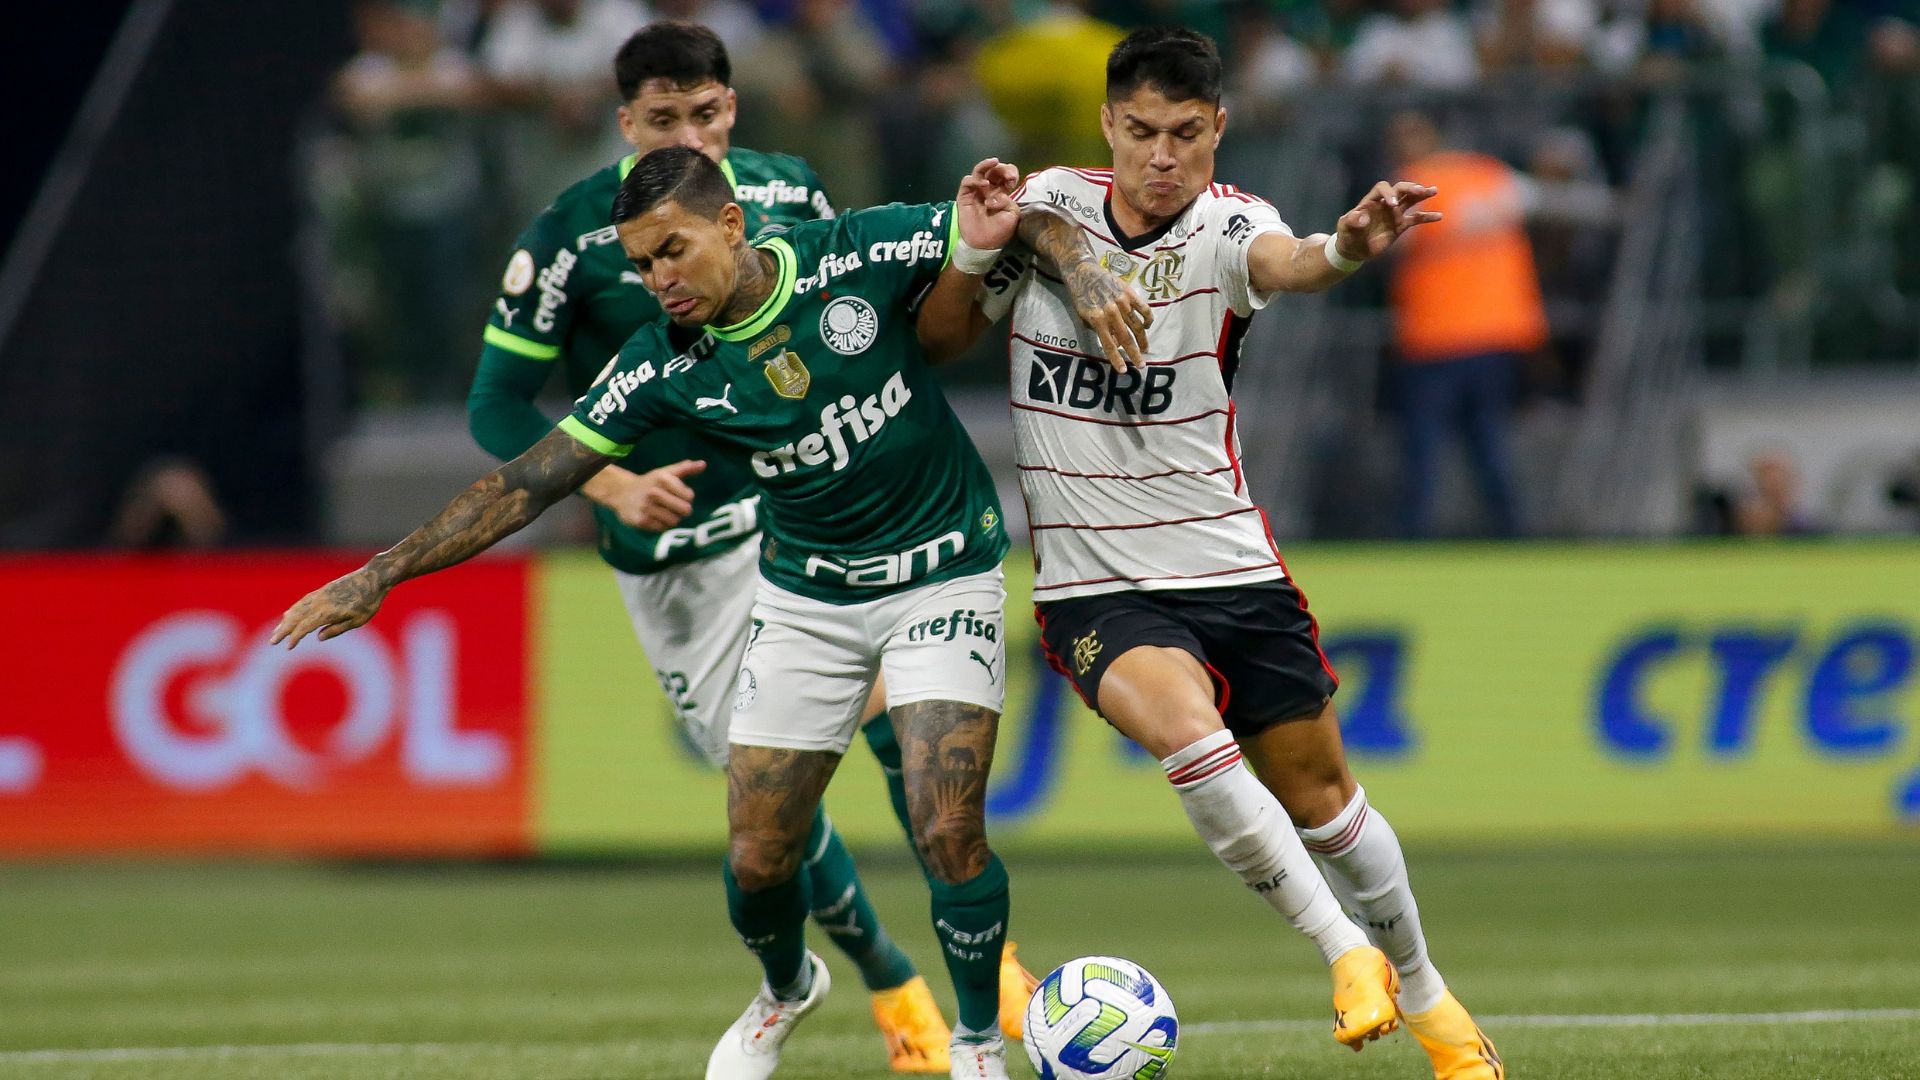 The last Palmeiras and Flamengo played at Allianz Parque ended in a 1-1 draw (Credit: Getty Images)